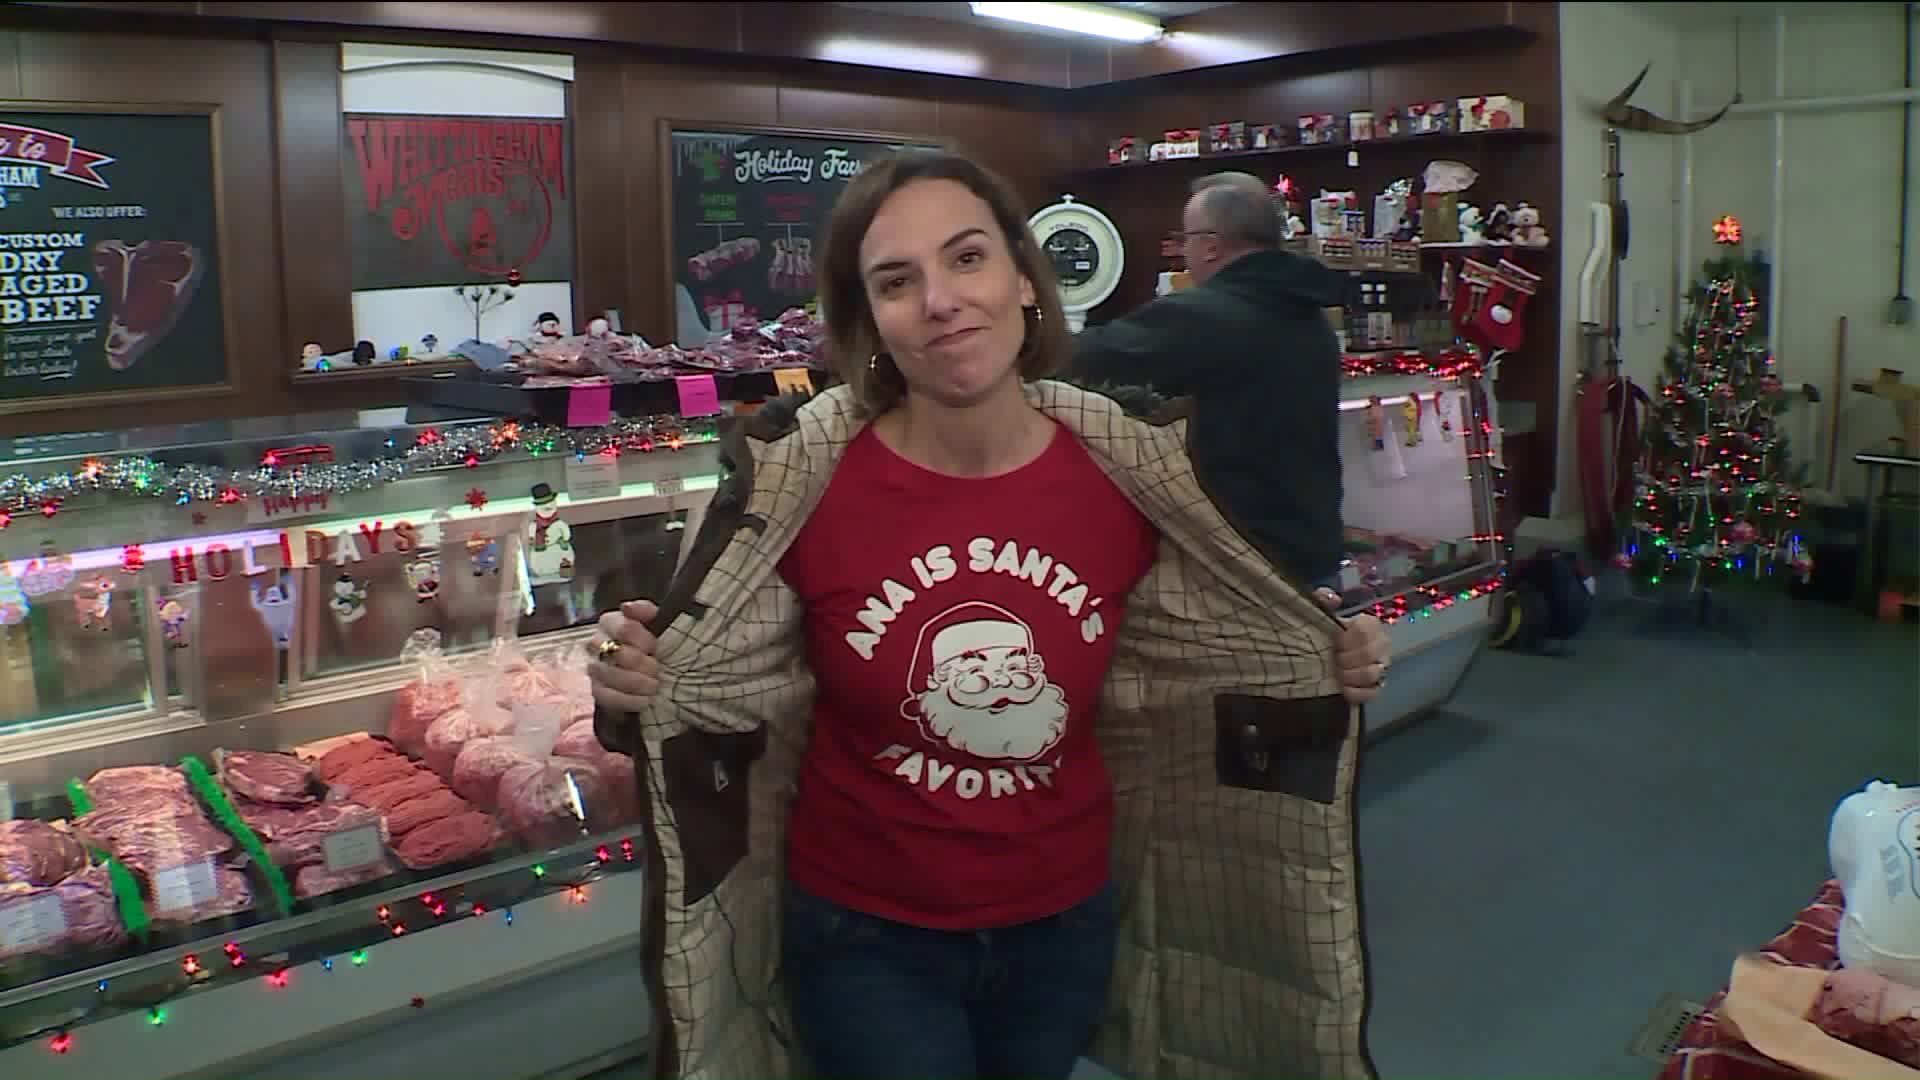 Around Town checks out Whittingham Meats just in time for the holidays